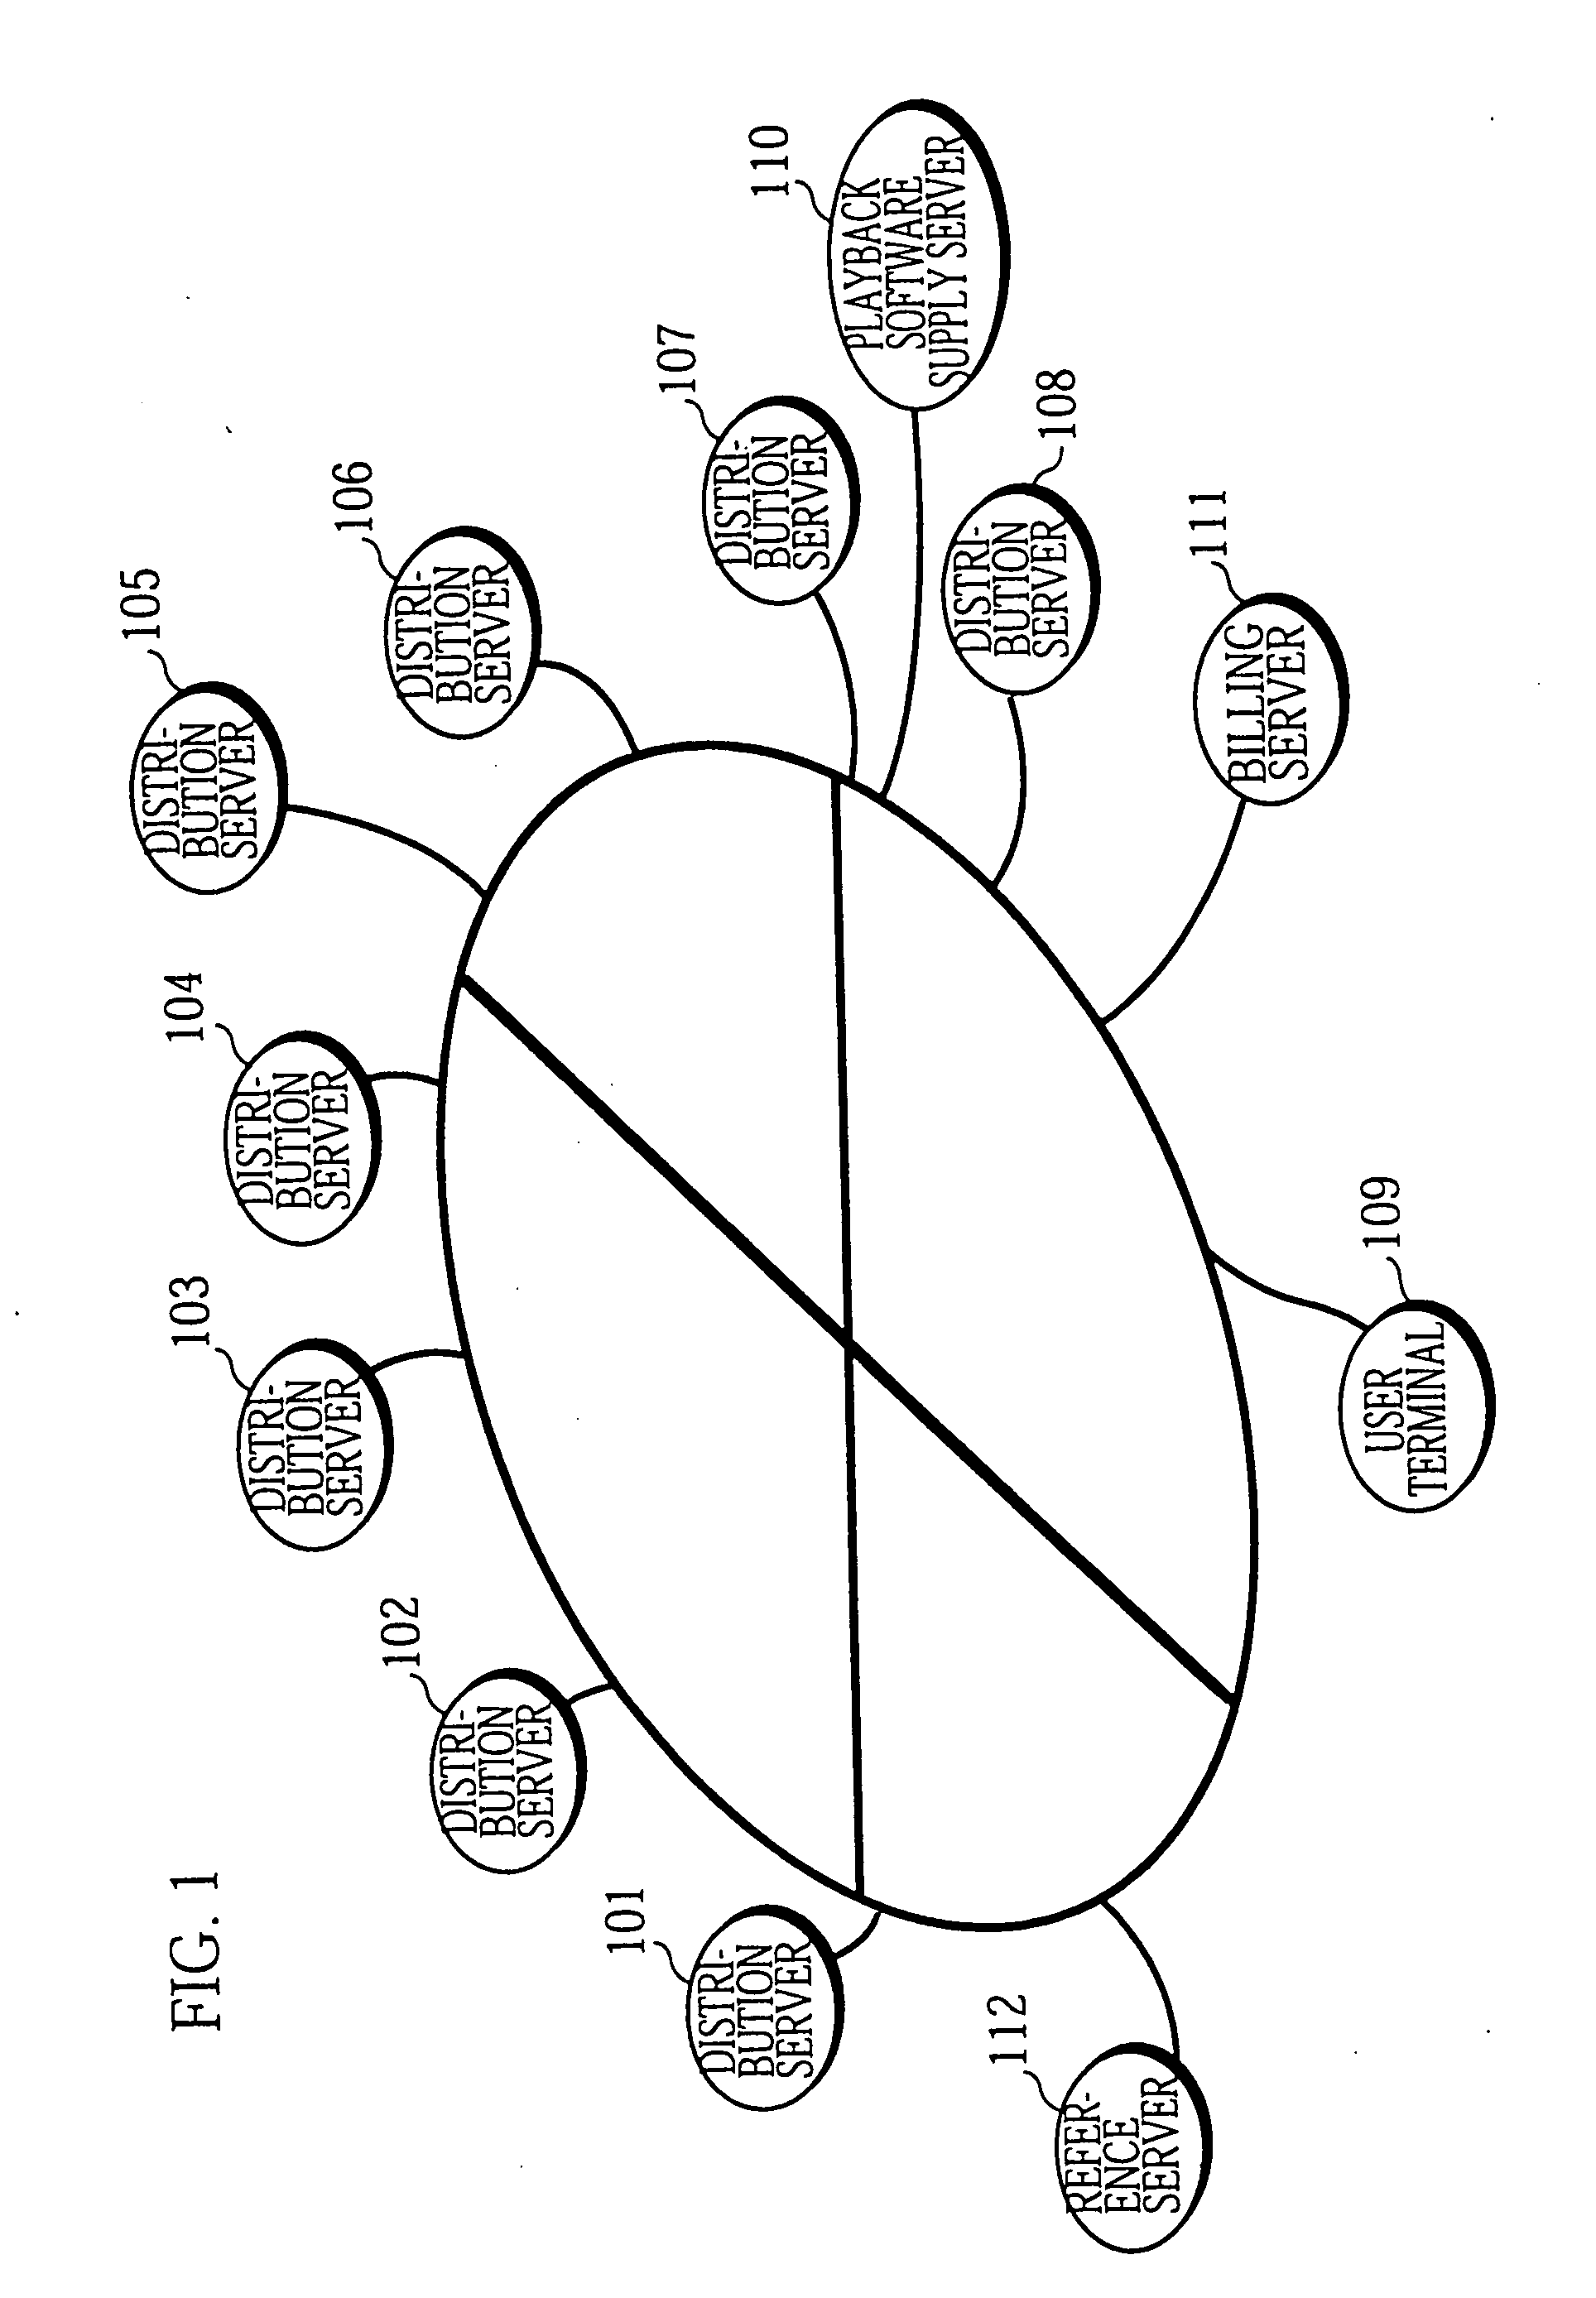 Content distribution system and a reference server